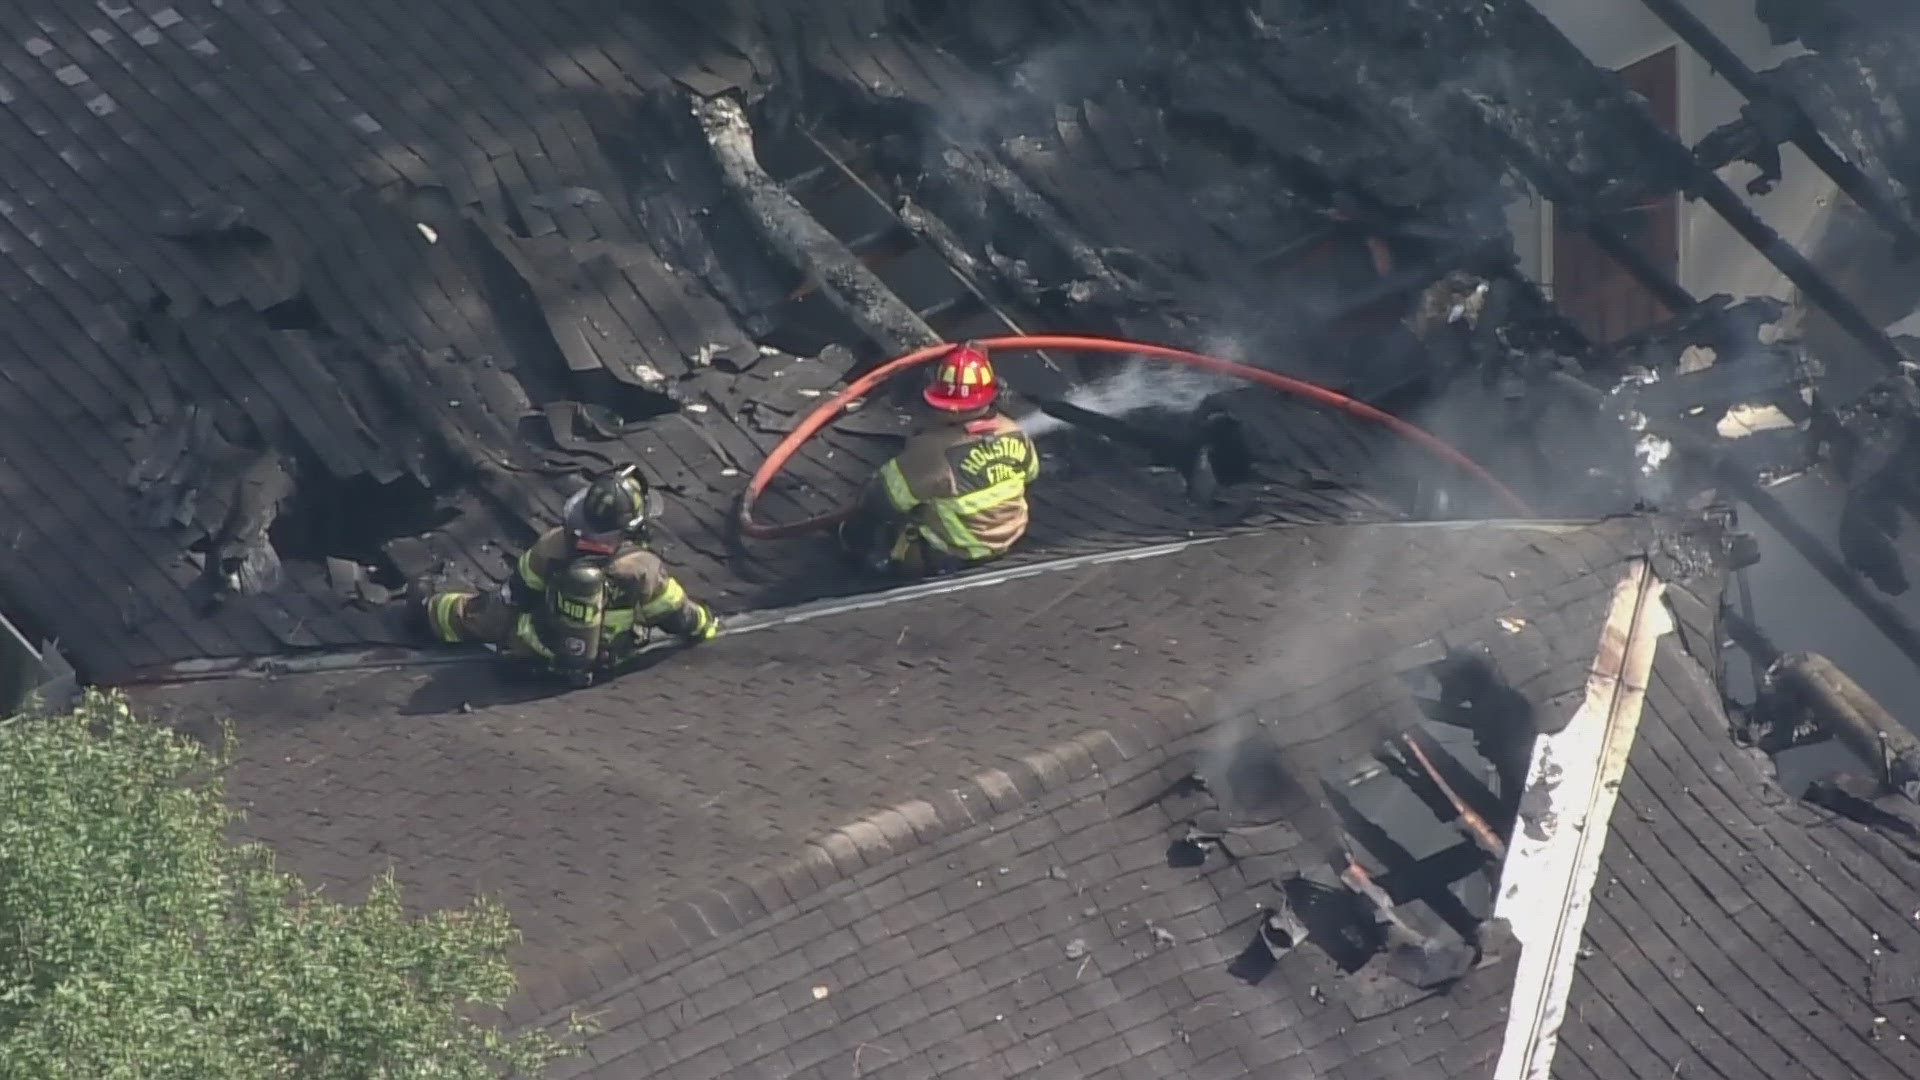 HFD said the fire broke out at a house on Memorial Drive near the West Loop.